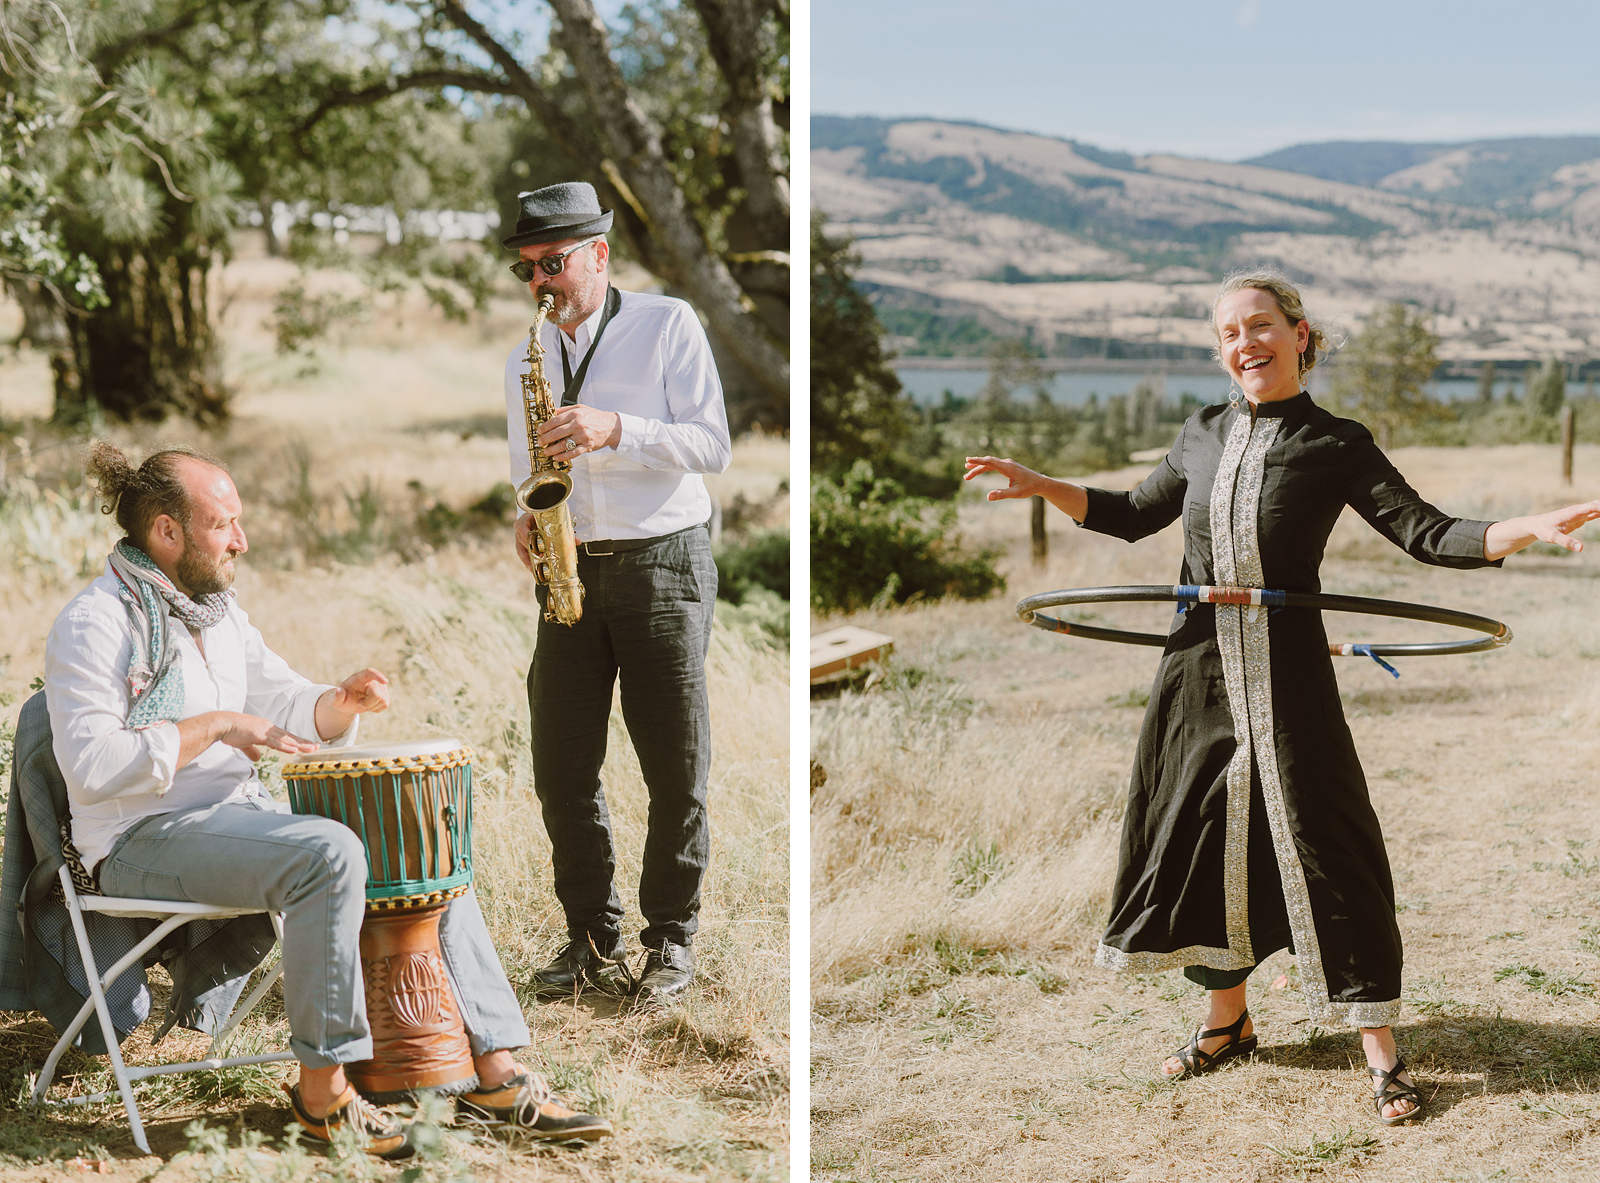 Guests playing drums and saxophone while others hula hoop - Columbia River Gorge wedding reception in Mosier, OR